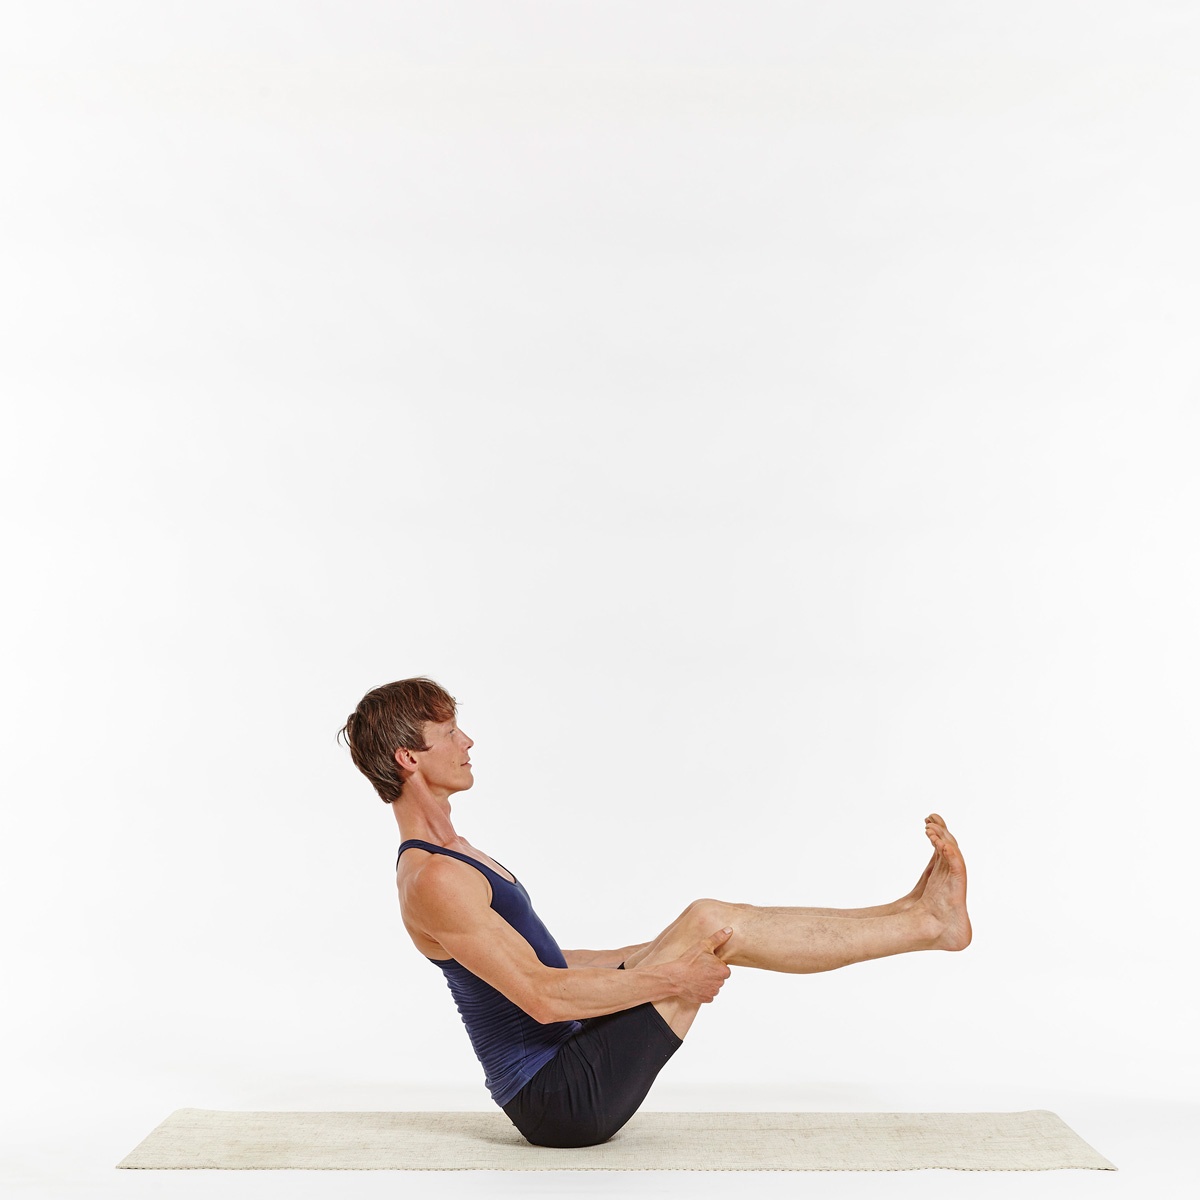 15 Seated Yoga Poses To Improve Flexibility, Mobility, And Posture